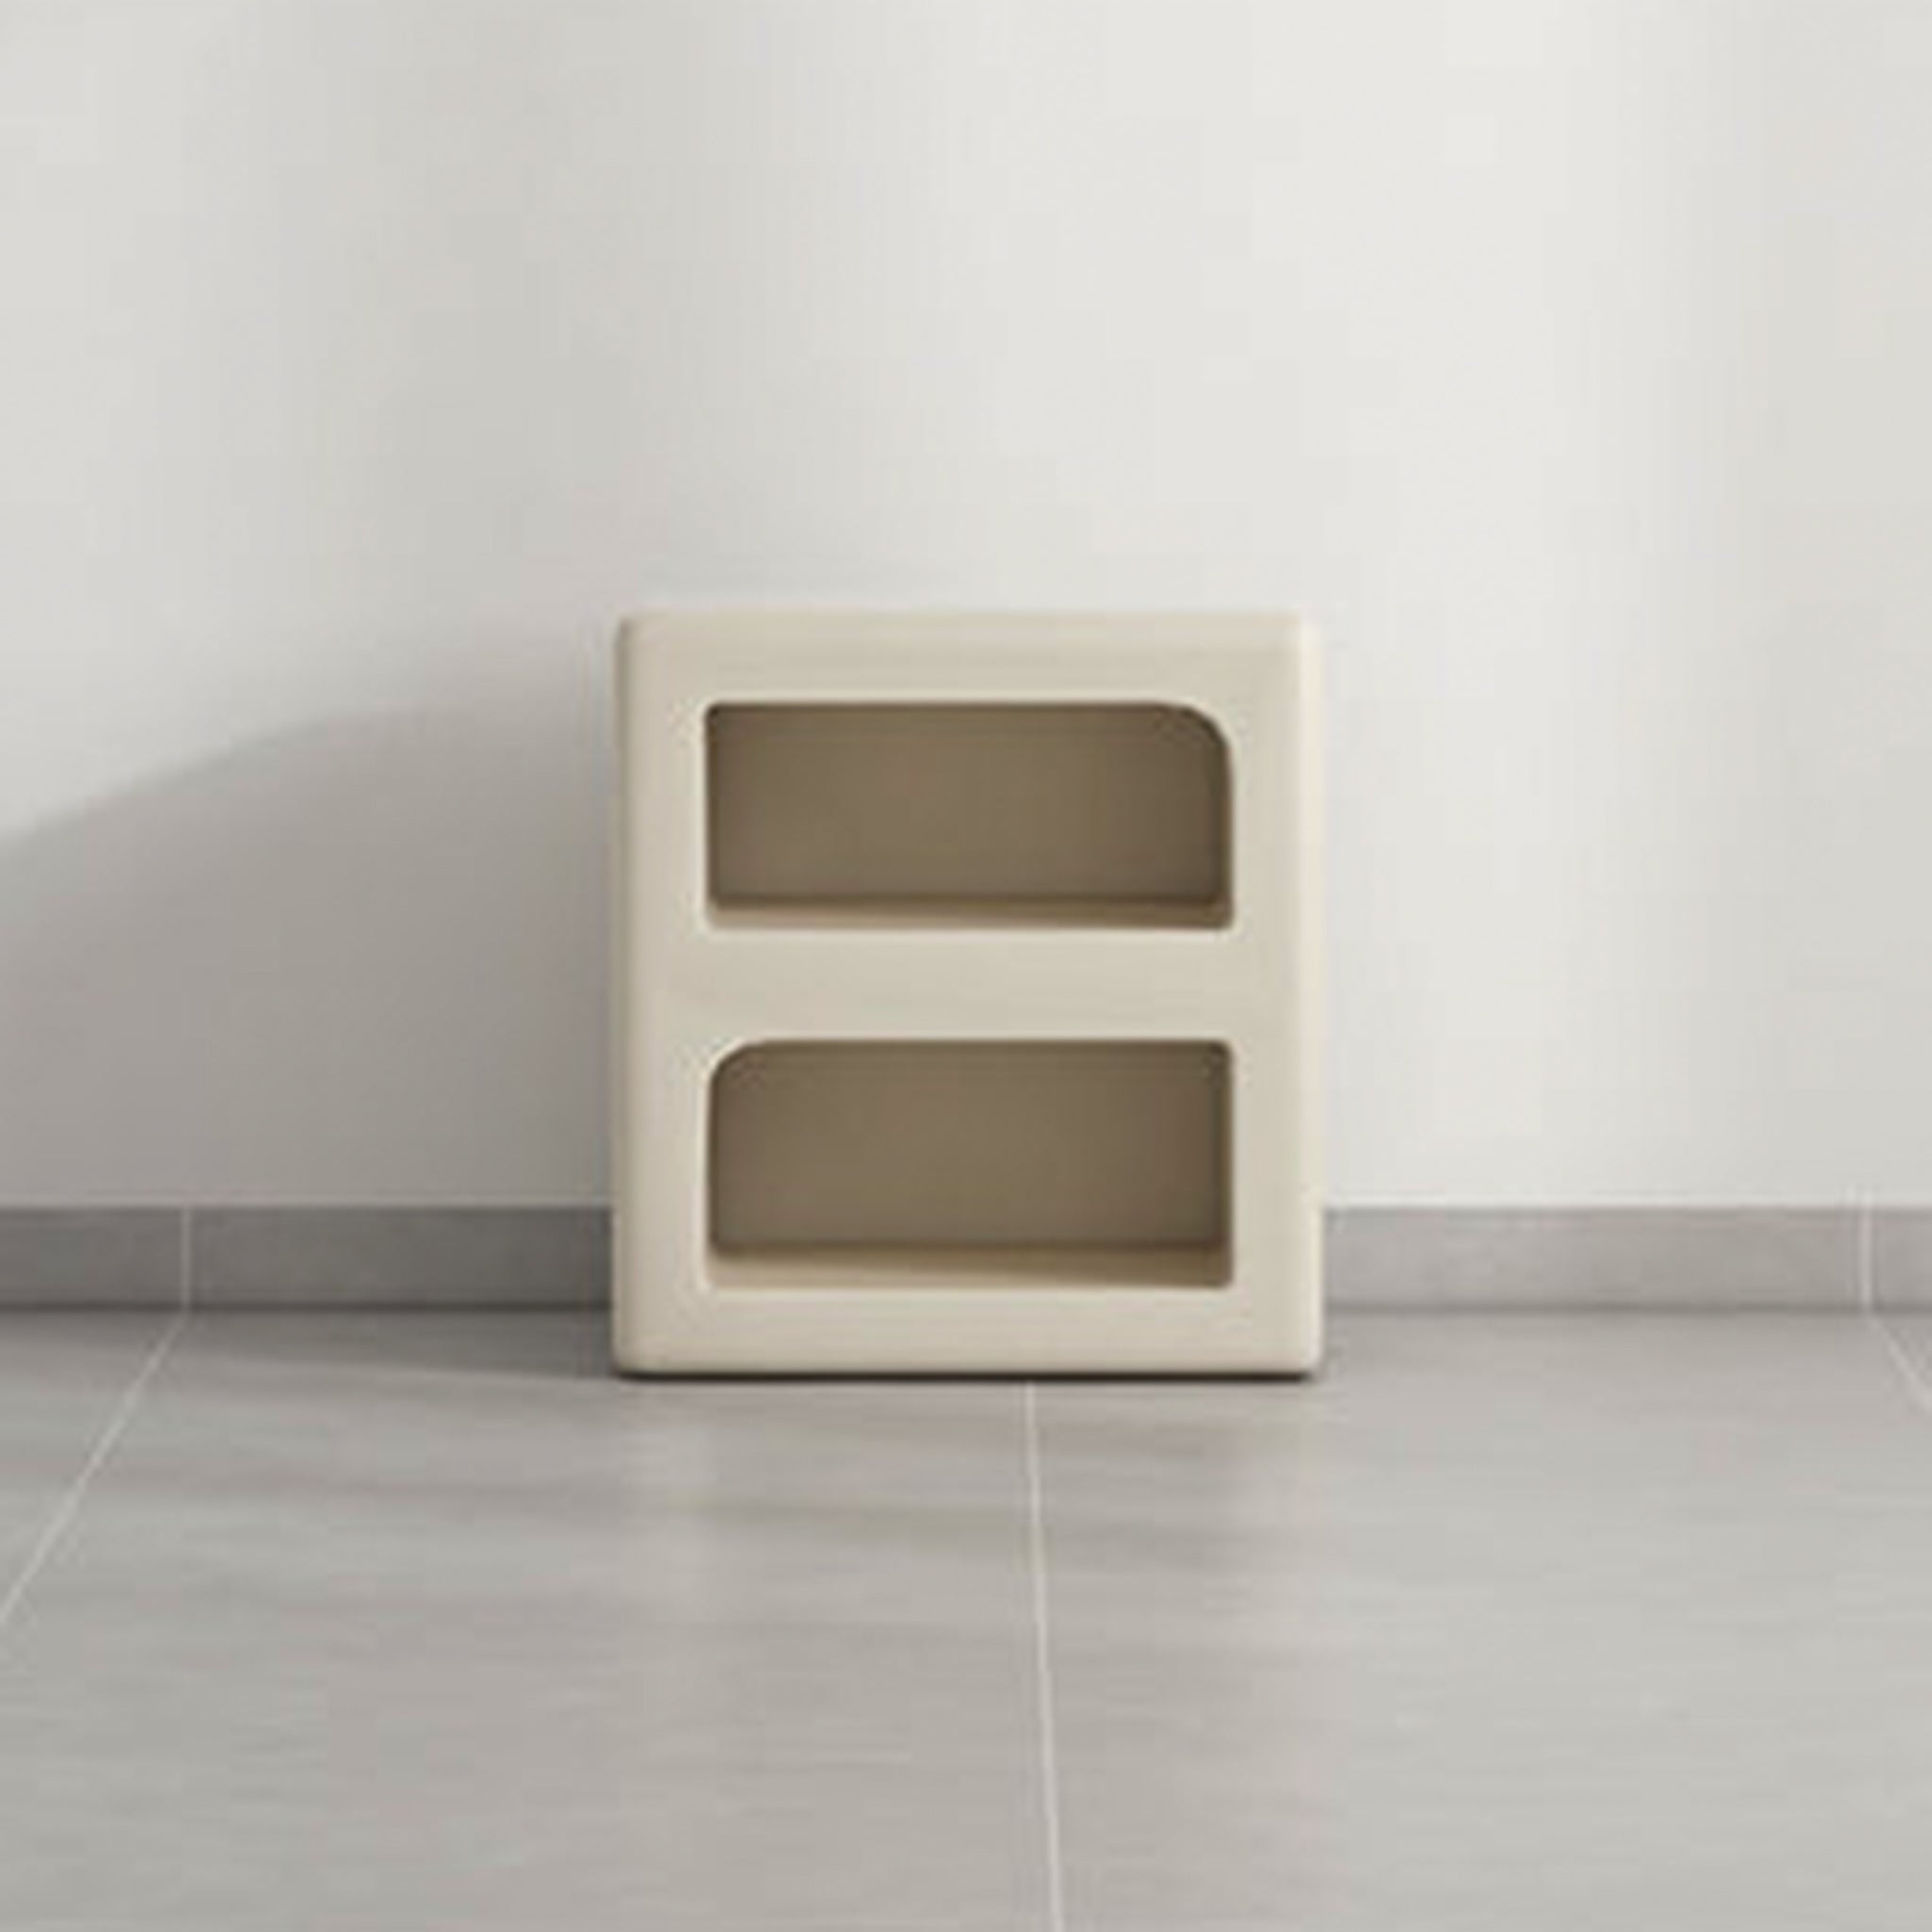 Side table with a nesting design, offering additional surface space when needed.